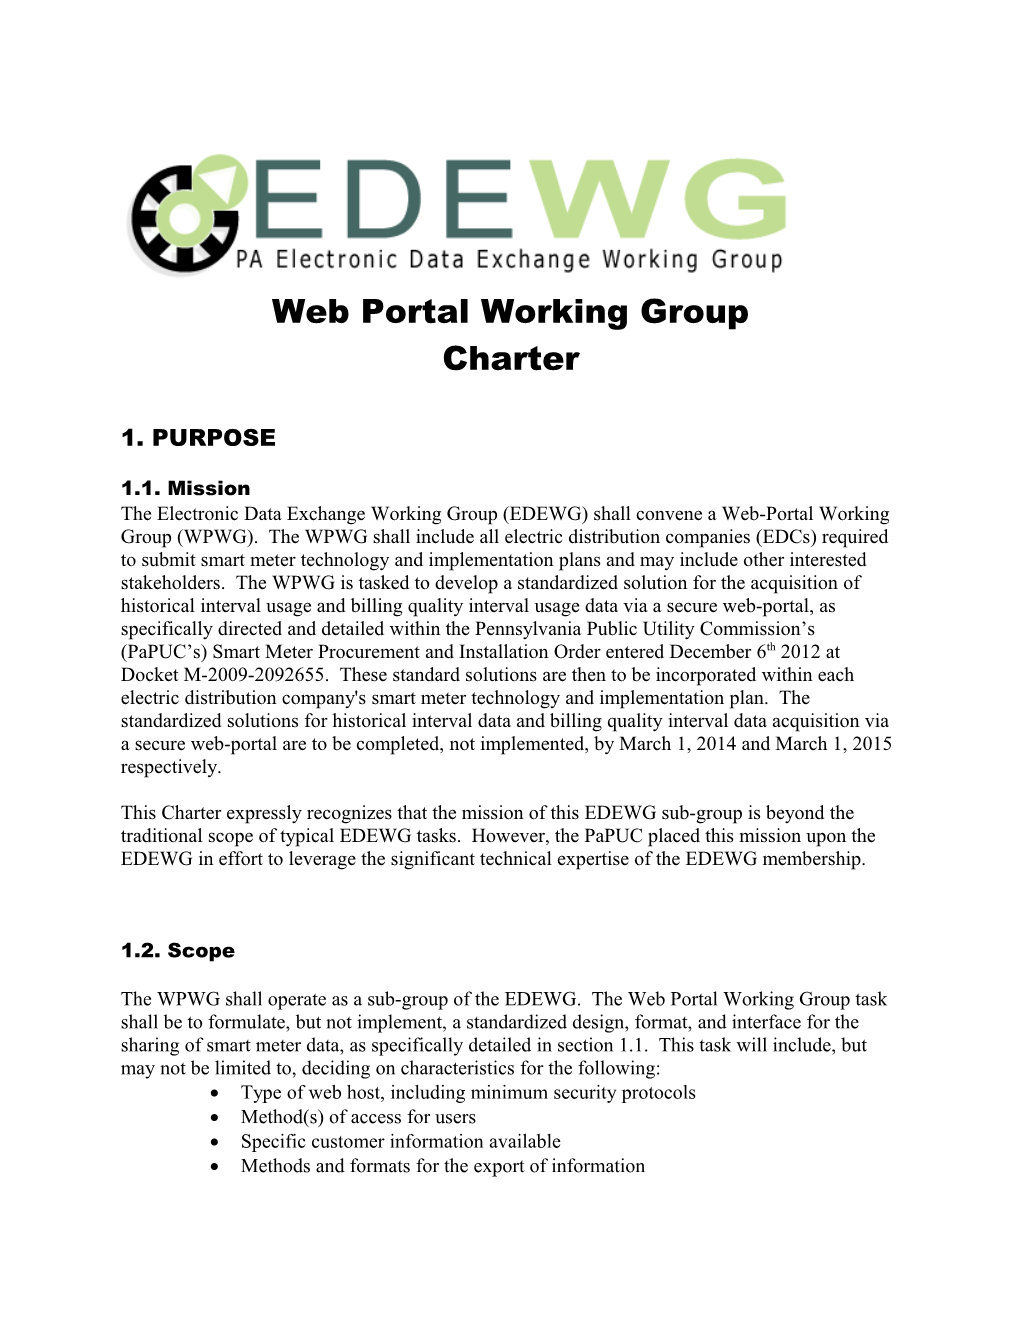 This Charter Expressly Recognizes That the Mission of This EDEWG Sub-Group Is Beyond The